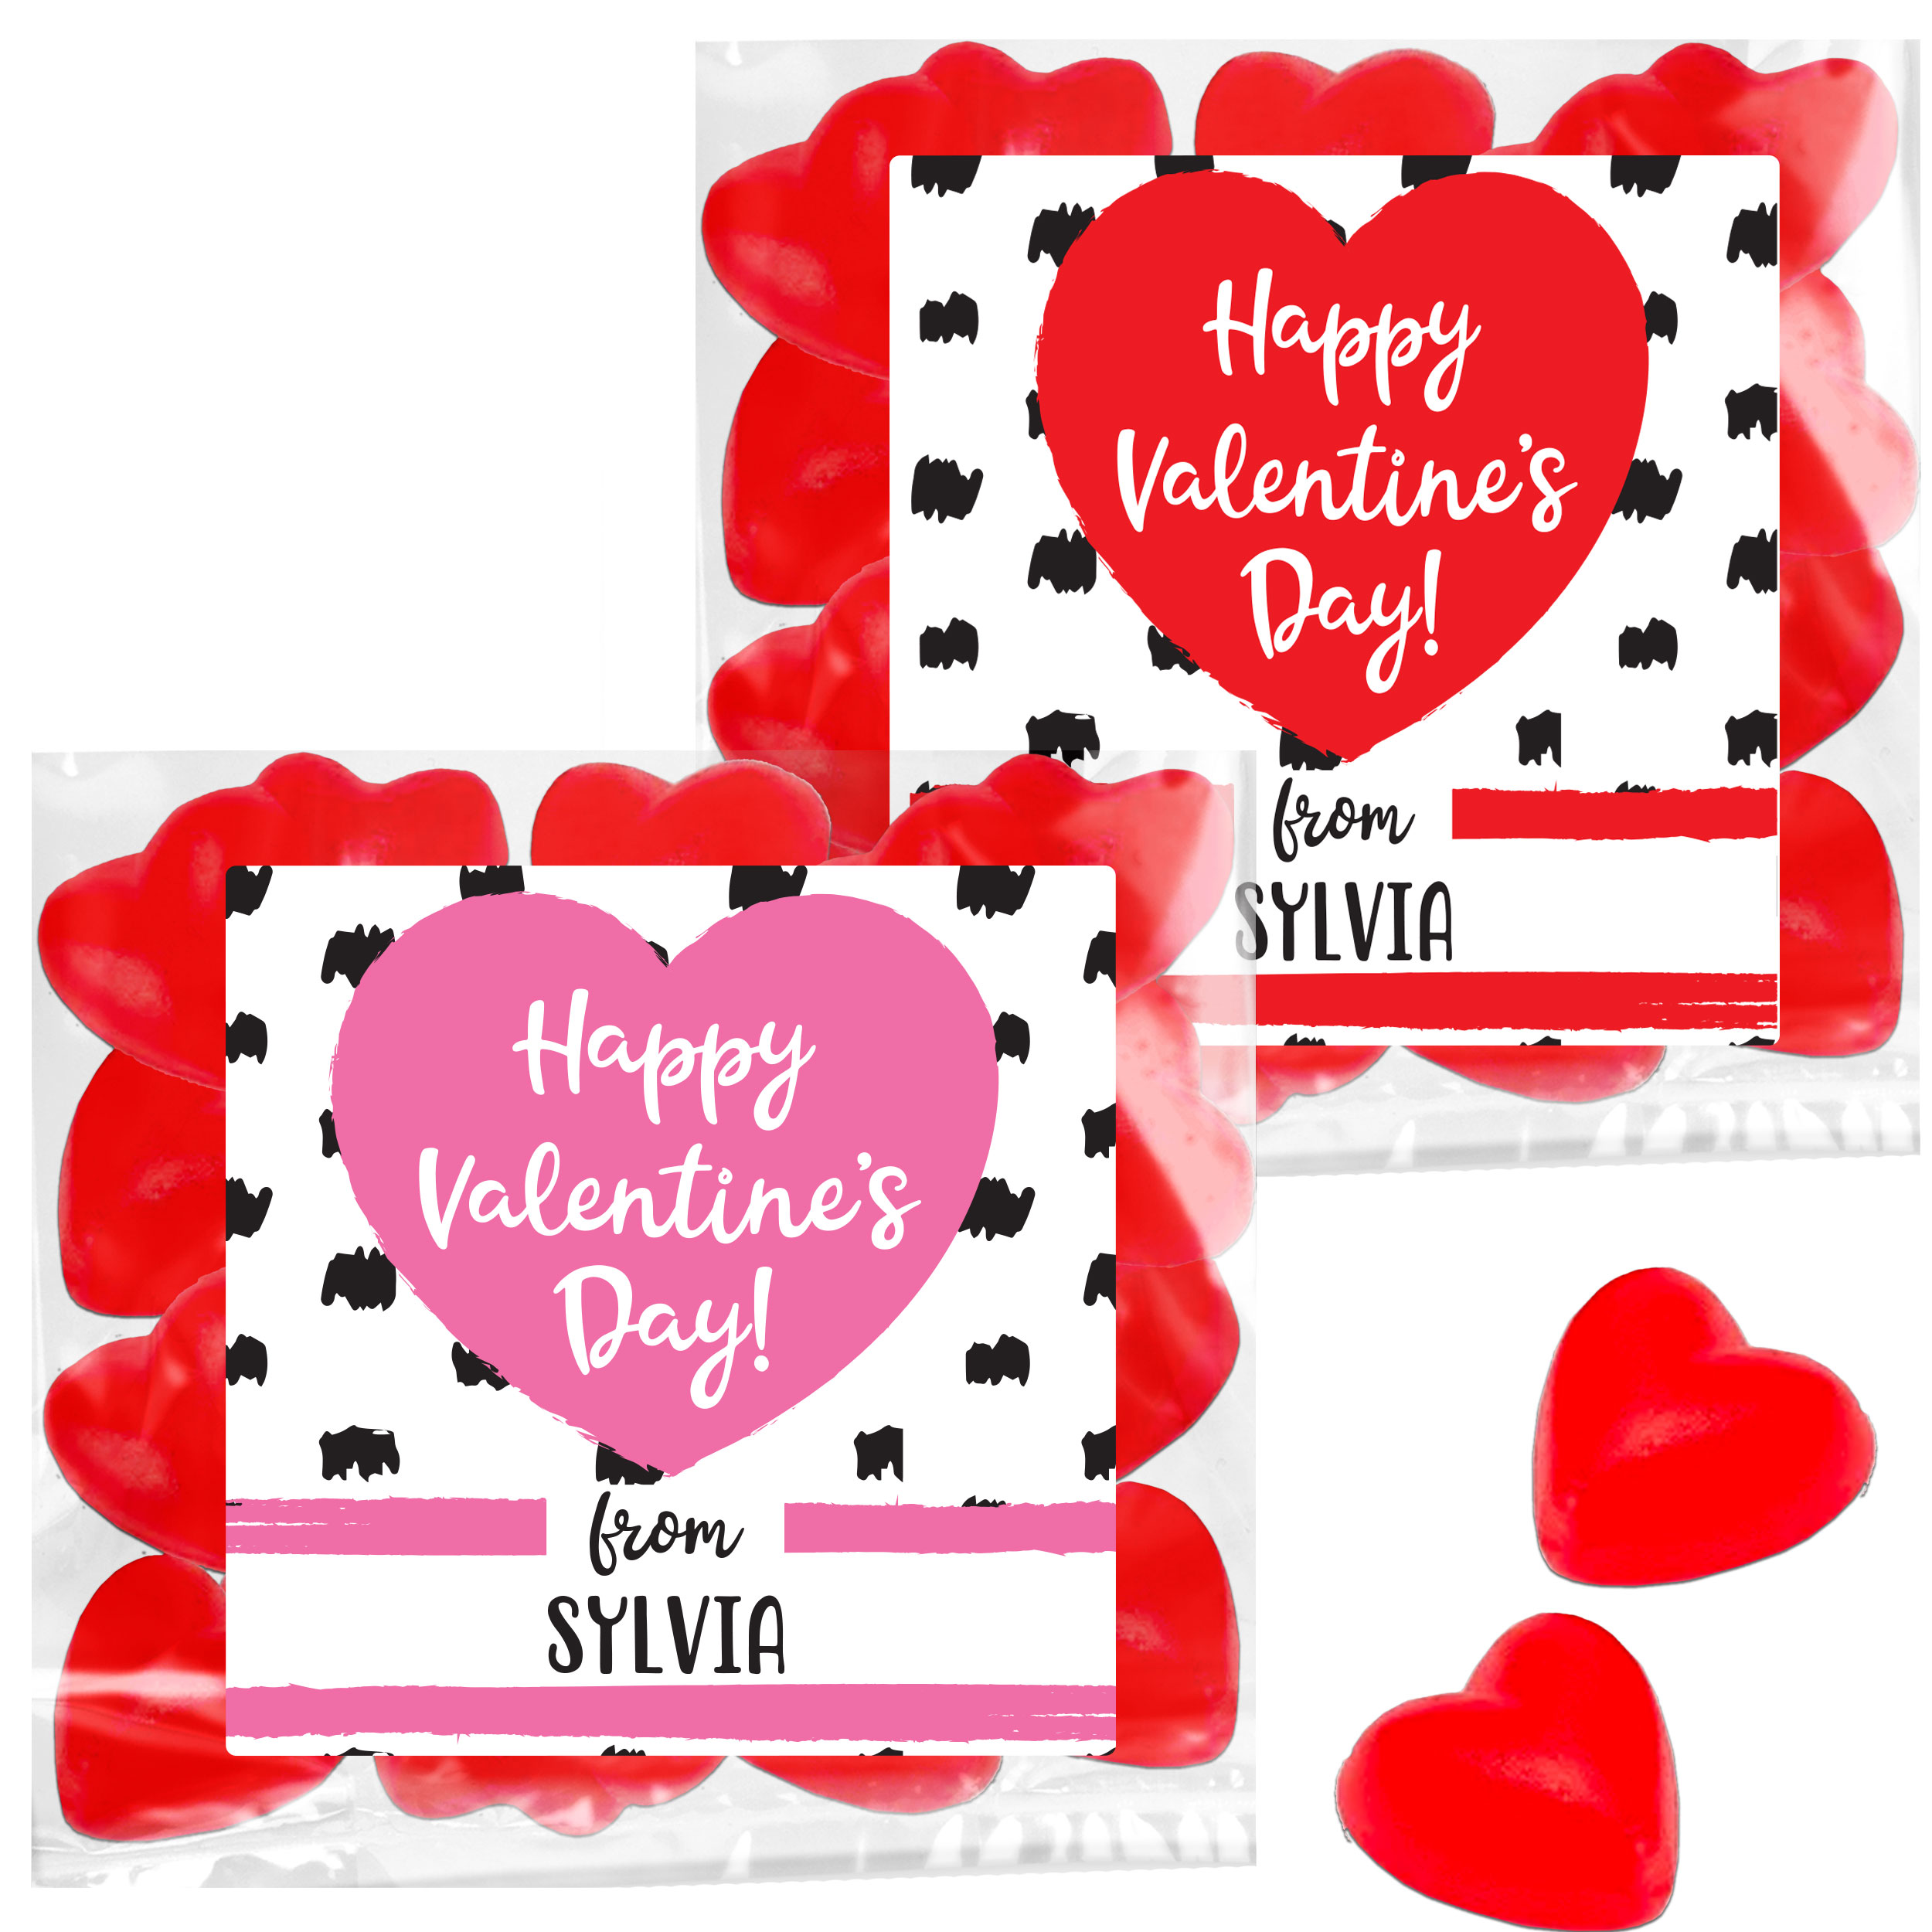 Mod Heart & Dots Personalized Valentine's Day Treat Bag Topper Kit